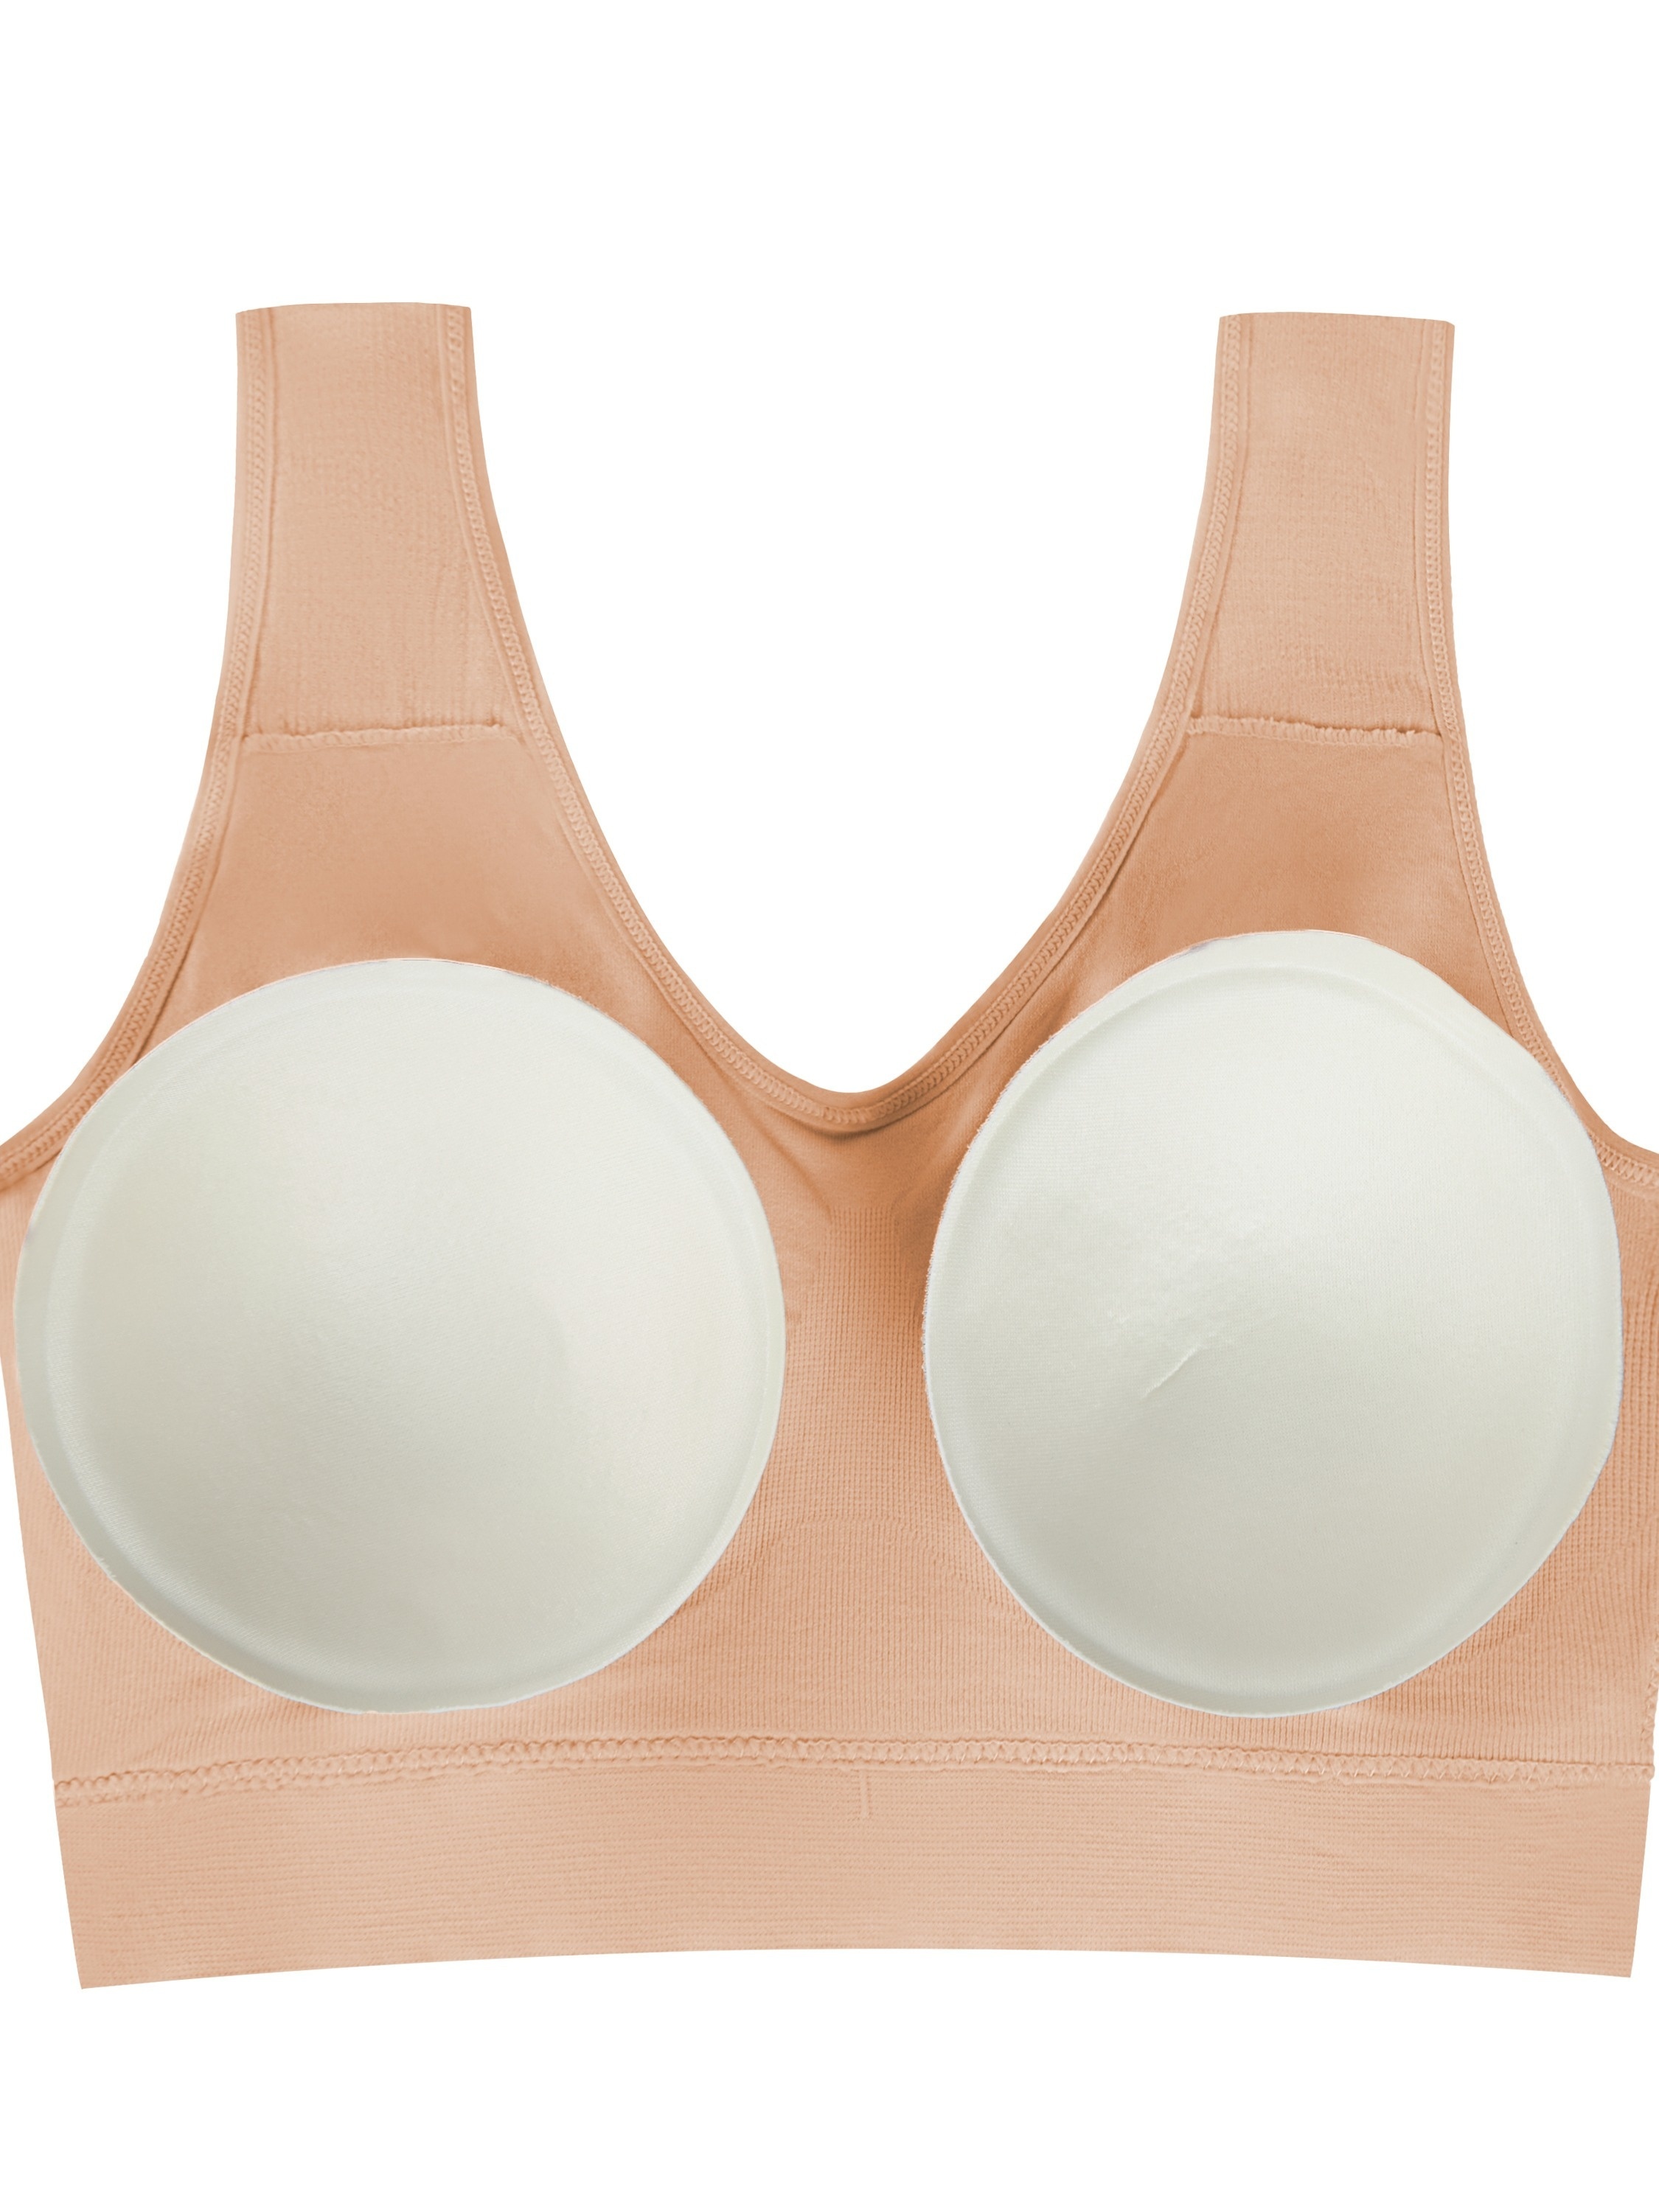 Hosiery Rainbow SEAMLESS Bra, Size: 28 To 40 B Cup, Plain at Rs 68